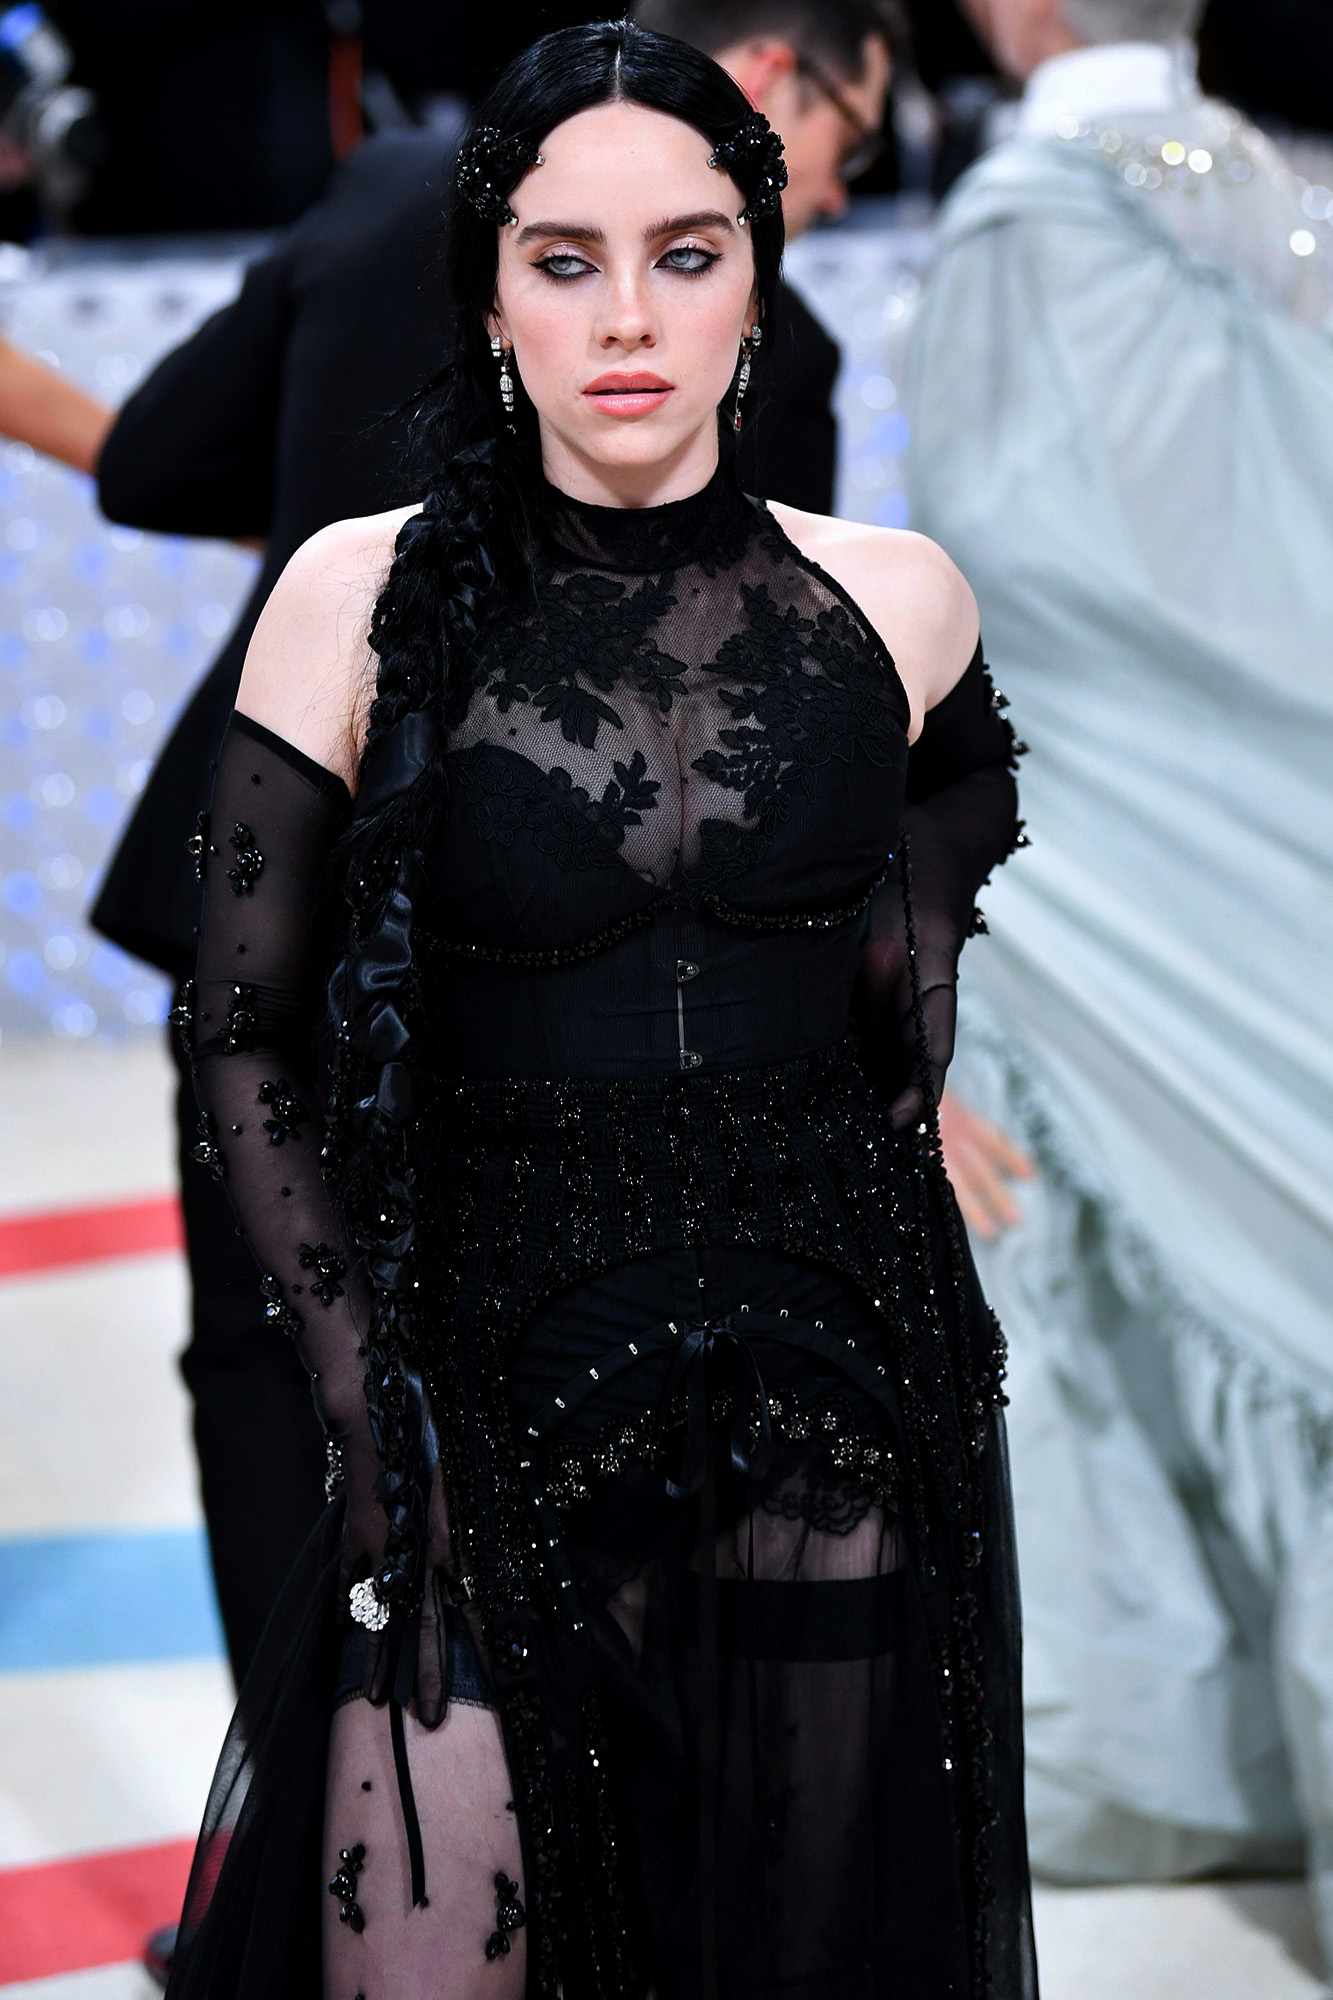 Billie Eilish Talks Hanging Out With Emma at the Met Gala